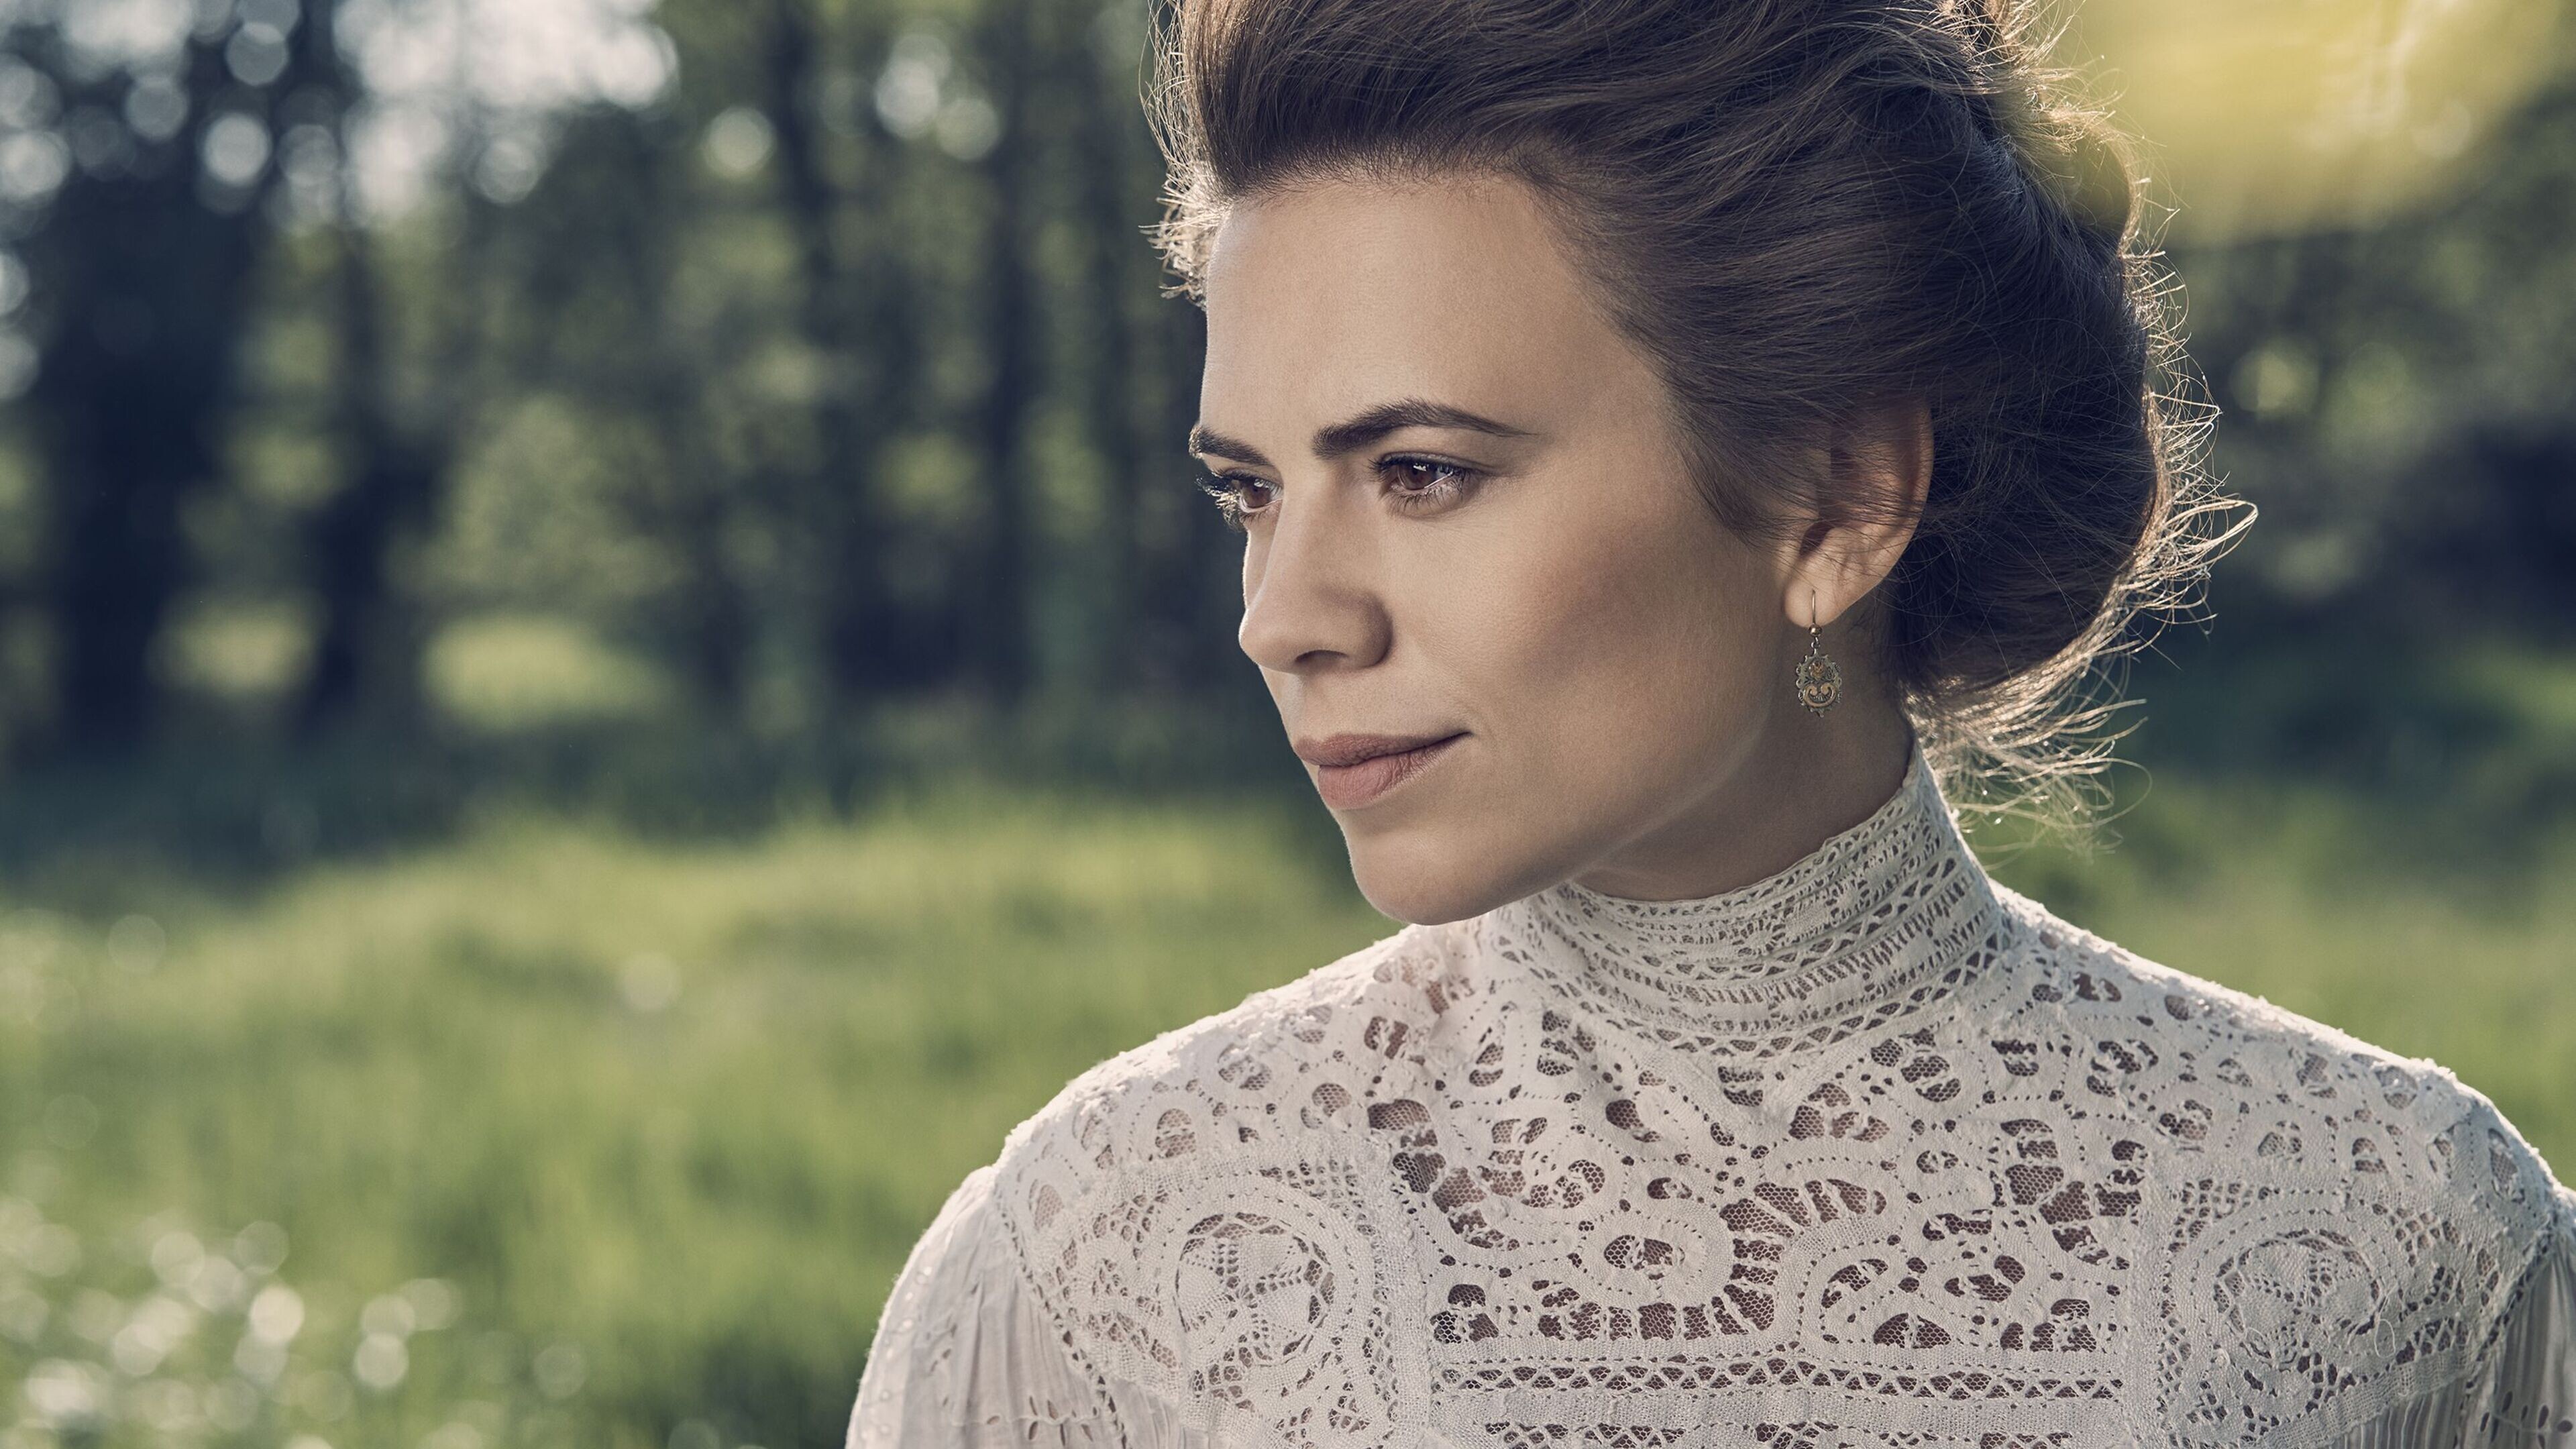 Hayley Atwell: Margaret Schlegel, Howards End, A British-American television drama based on a novel by E. M. Forster. 3840x2160 4K Background.